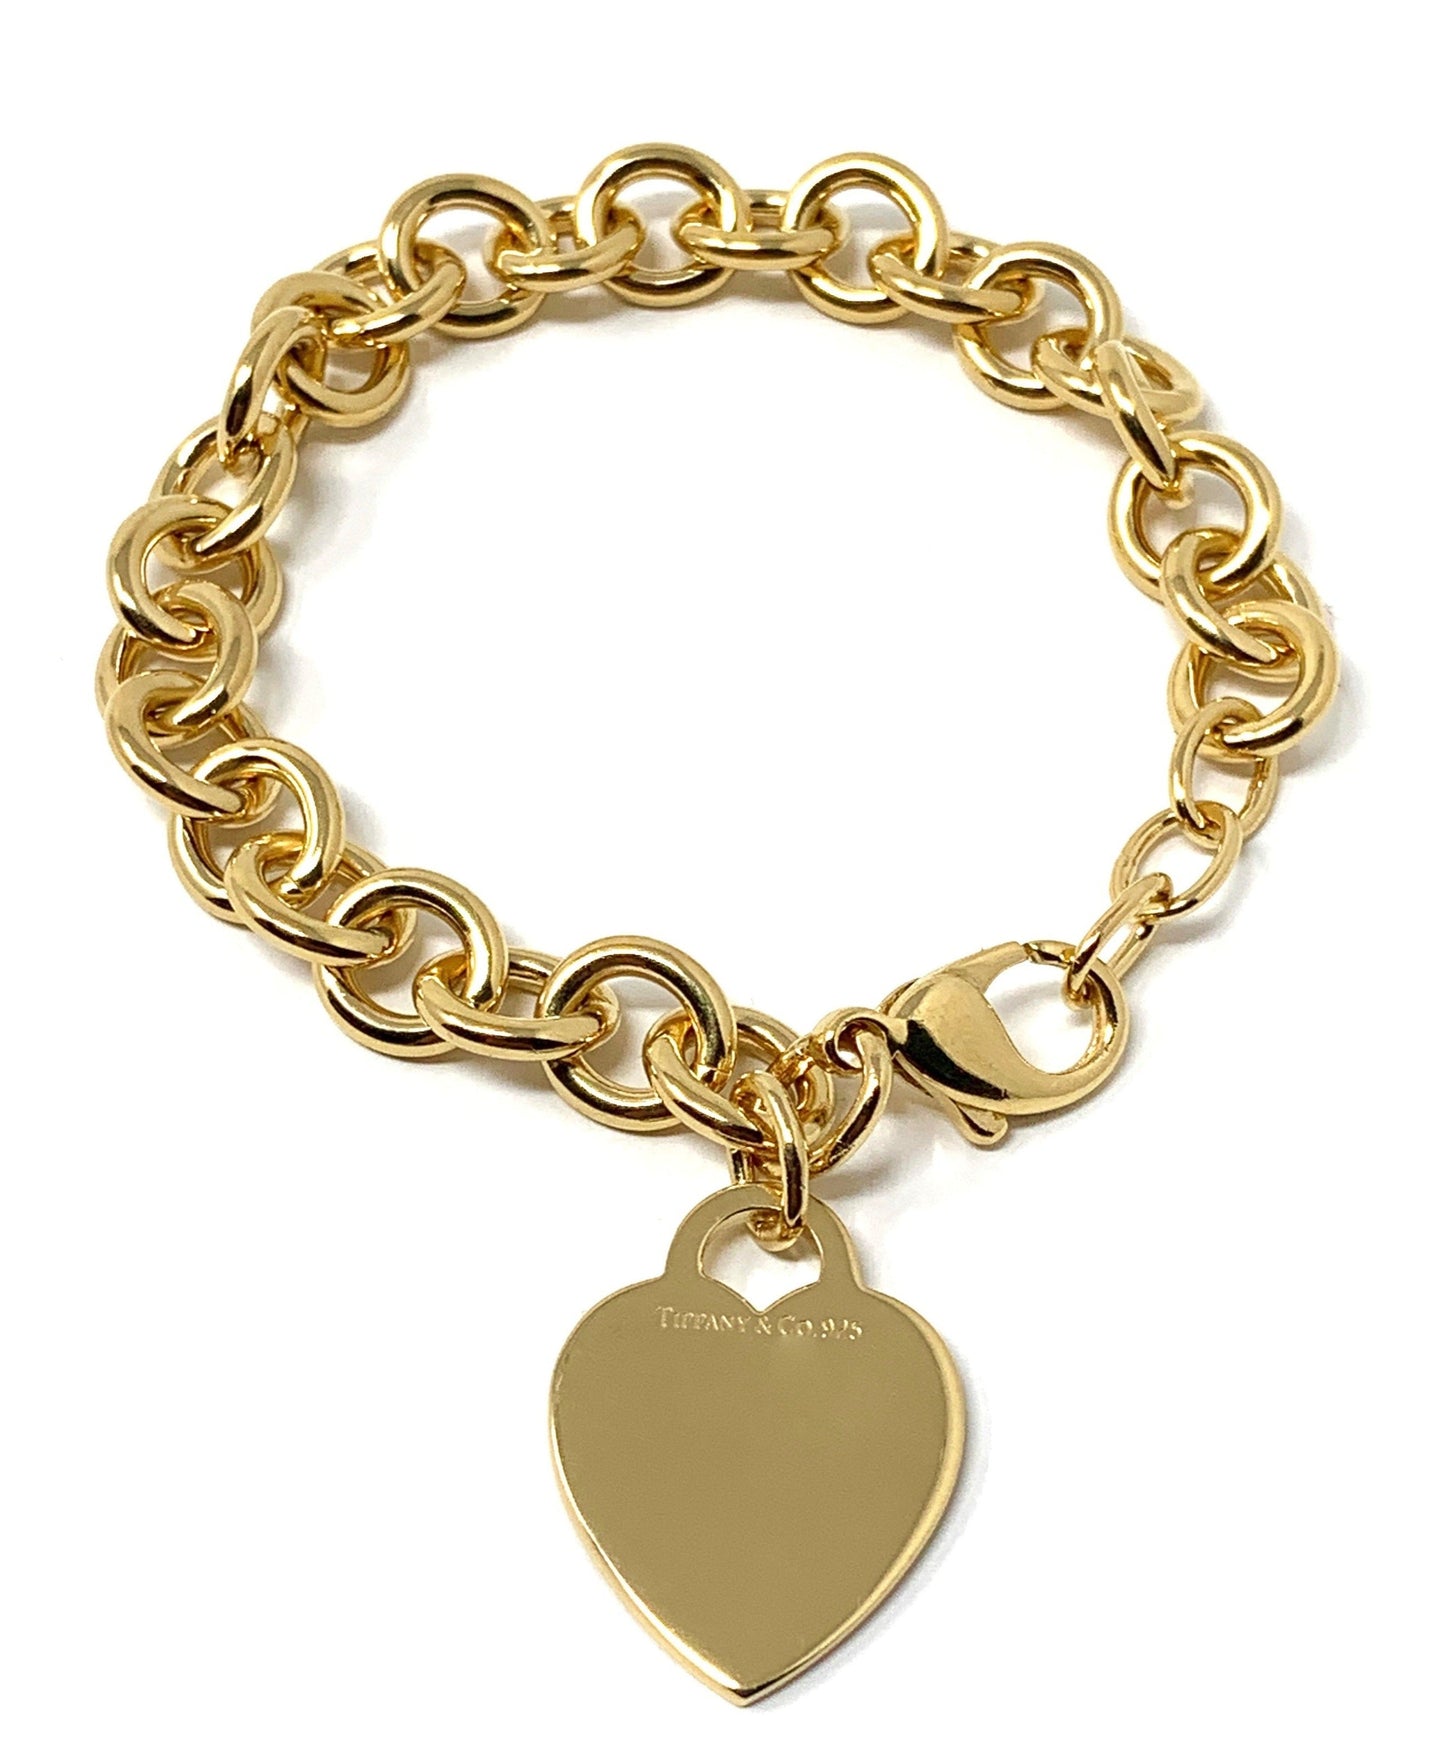 Tiffany&Co. 925 Silver Heart Charm Yellow Gold-Plated Bracelet